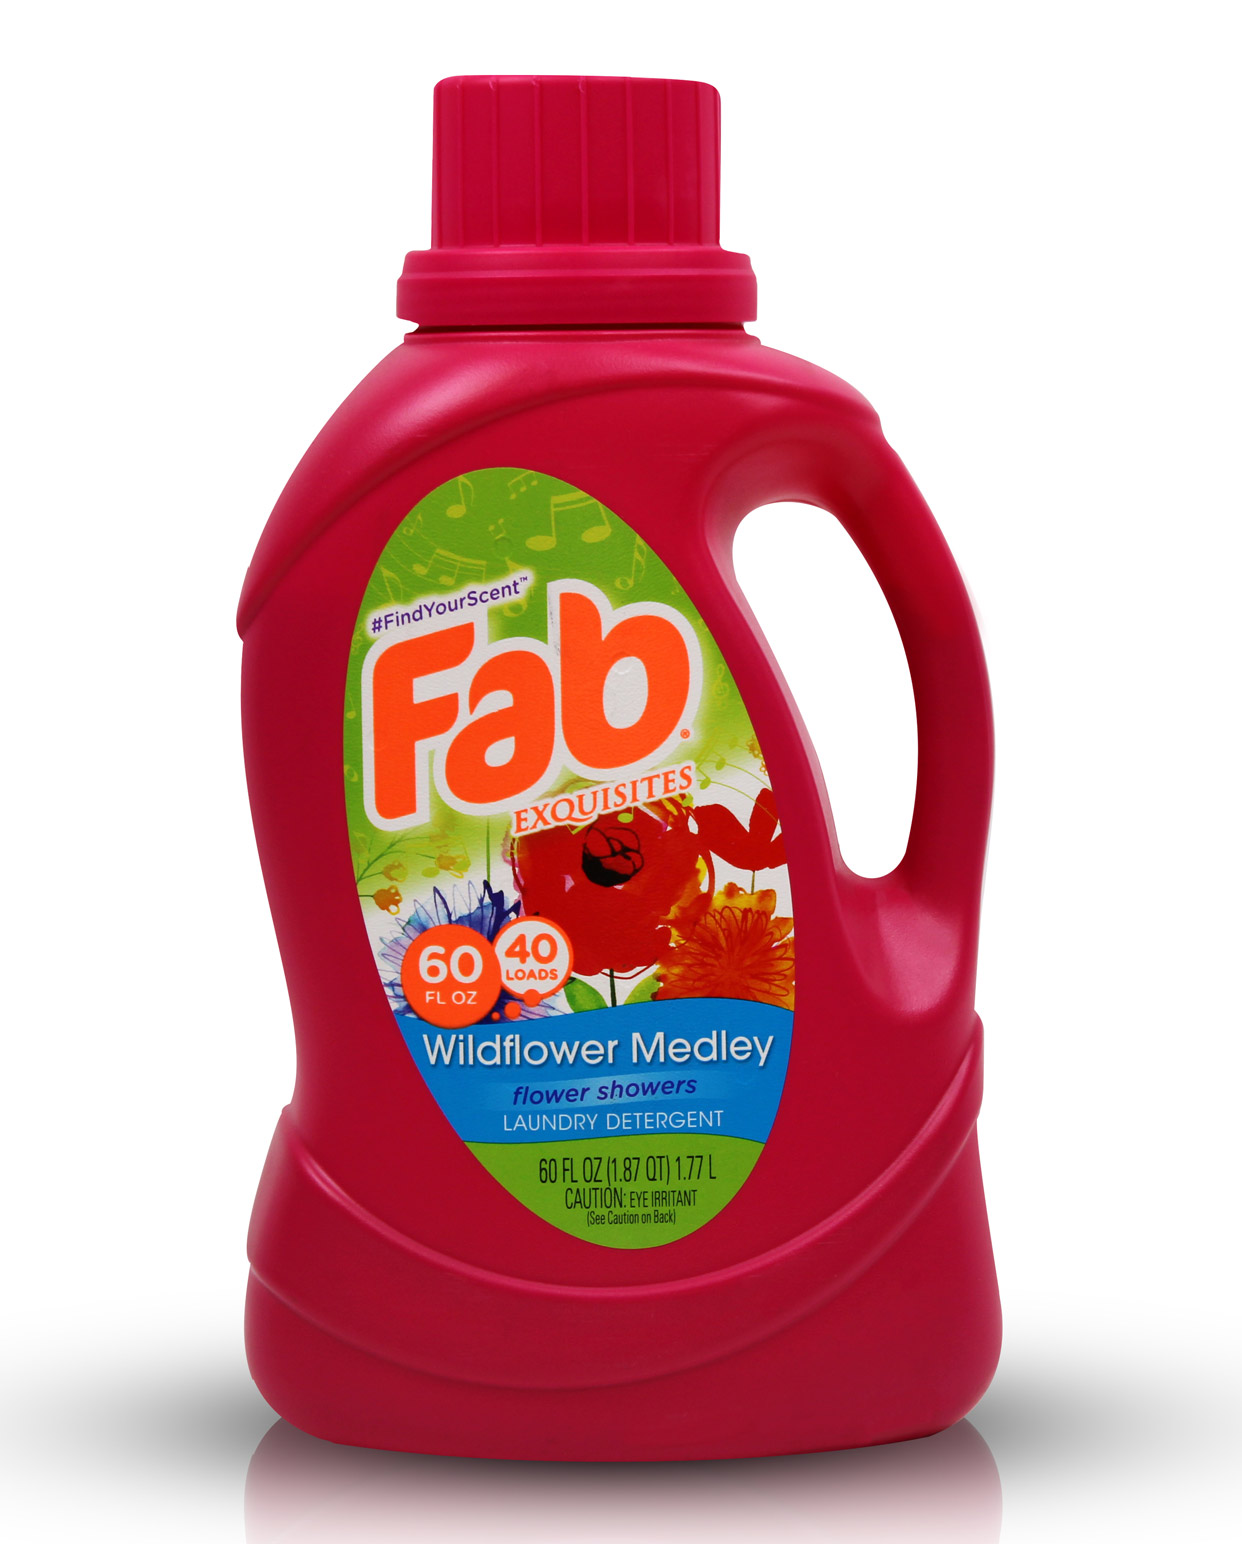 60oz bottle of FAB Affordable scented laundry detergent wildflower medley